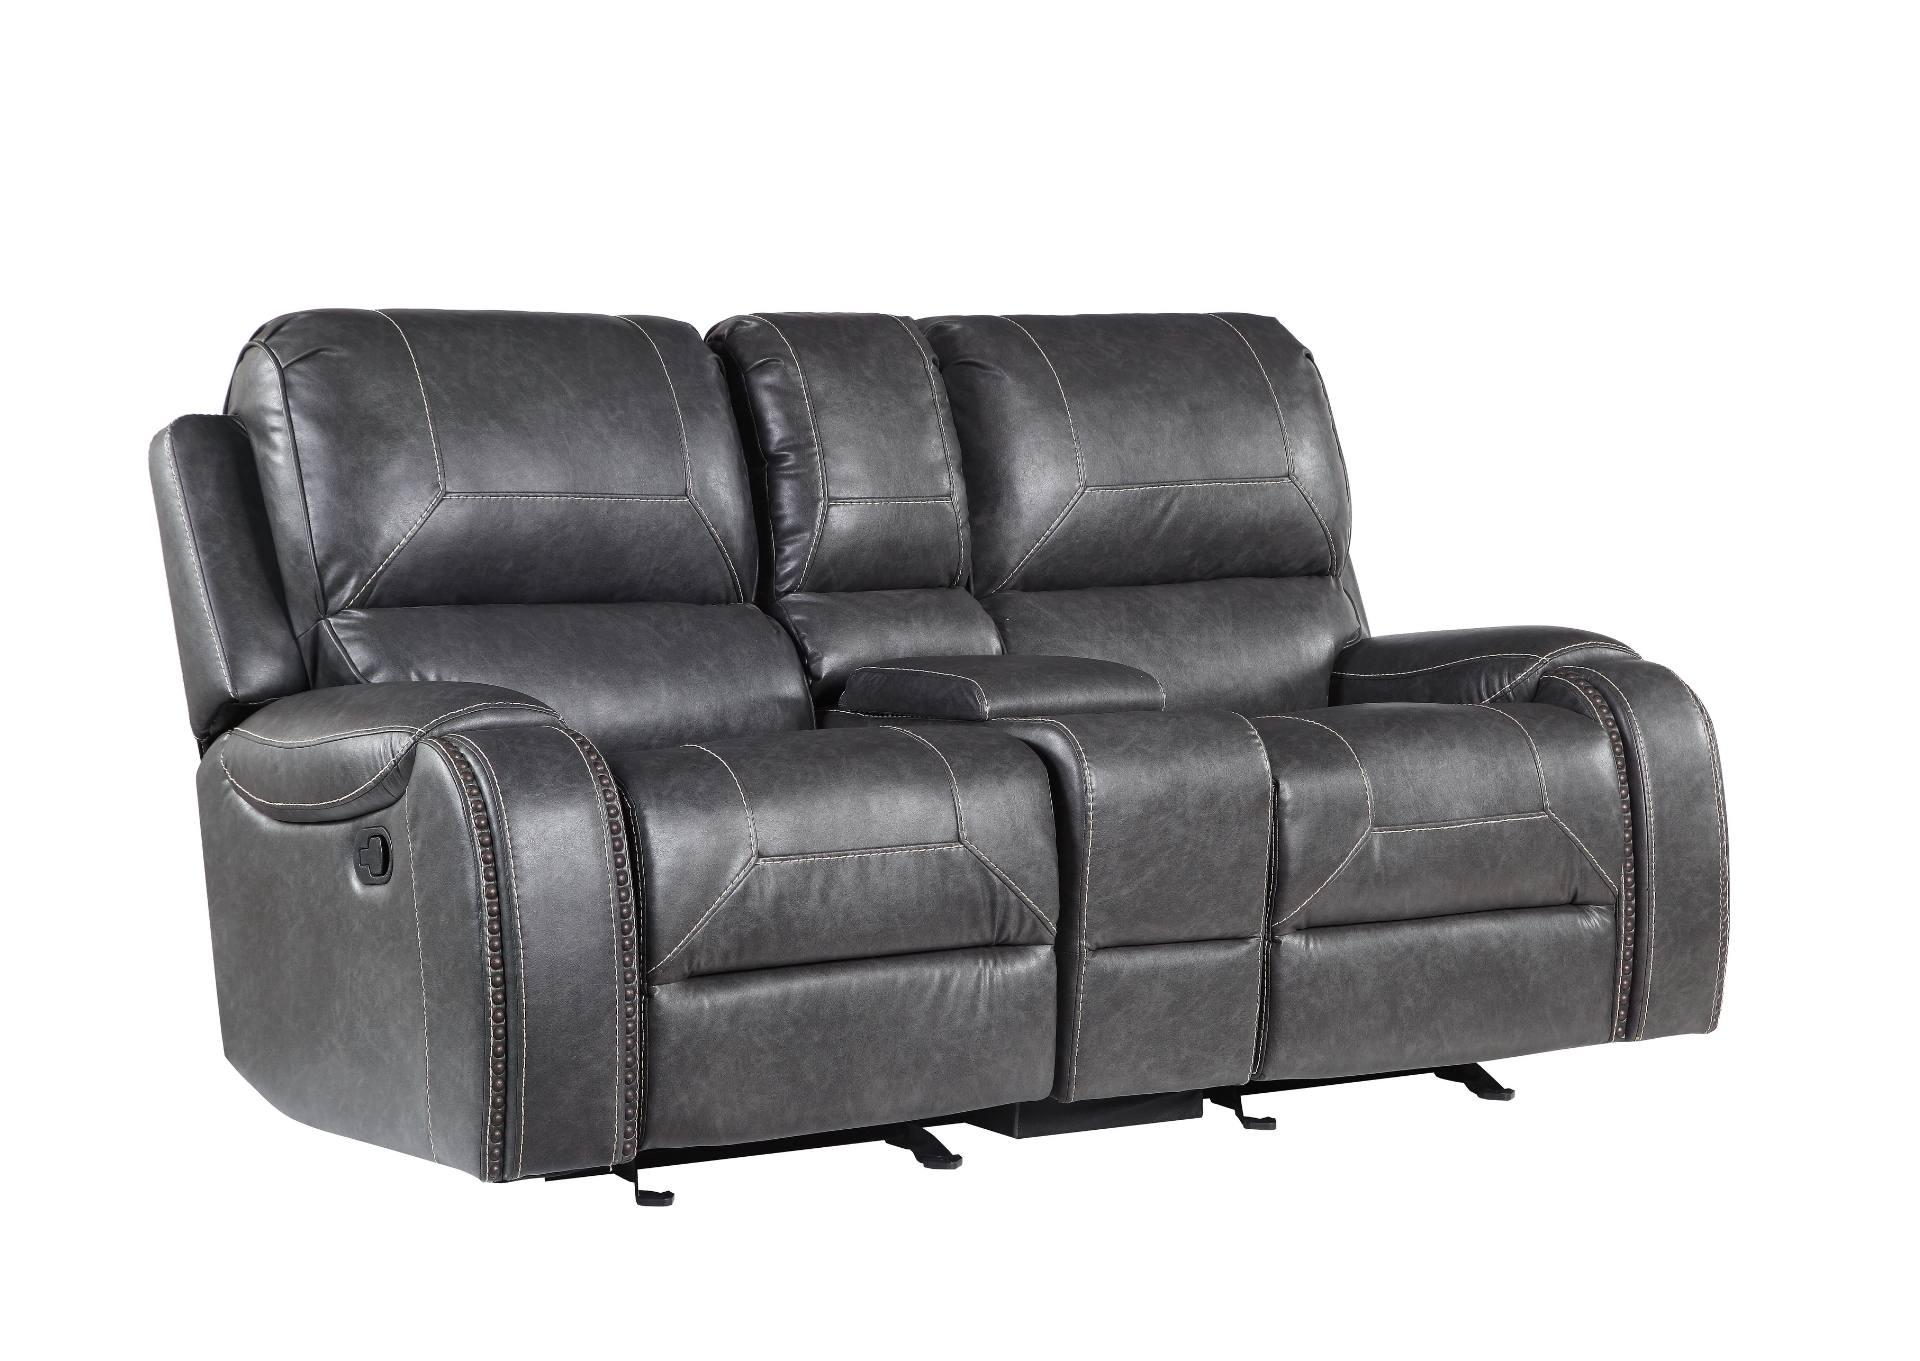 KEILY GREY RECLINING LOVESEAT WITH CONSOLE,STEVE SILVER COMPANY